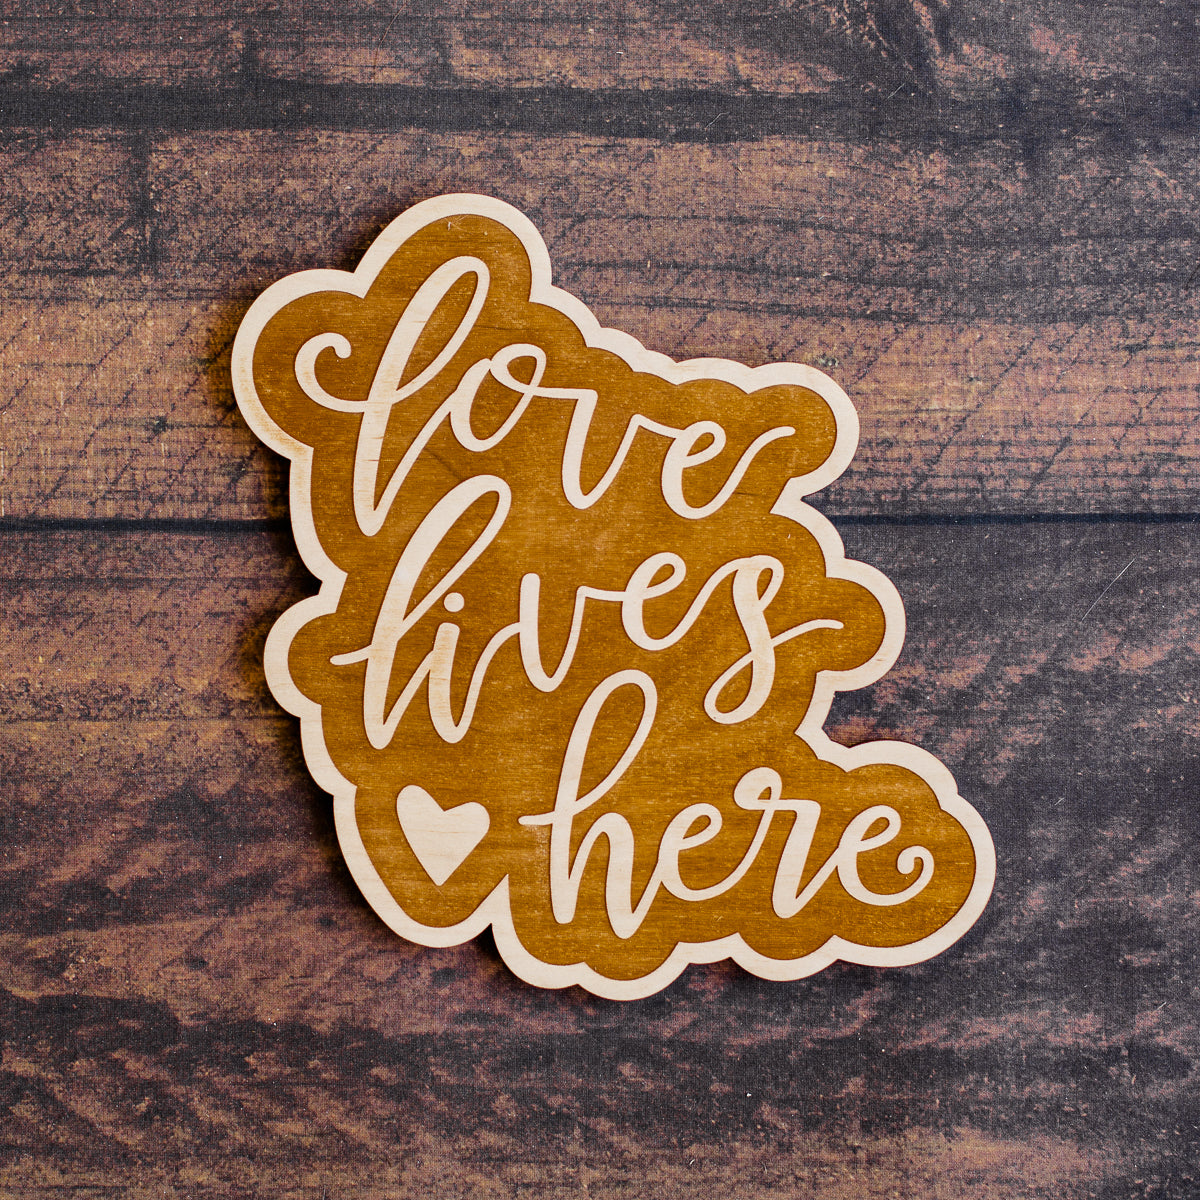 Love Lives Here Wood Sign